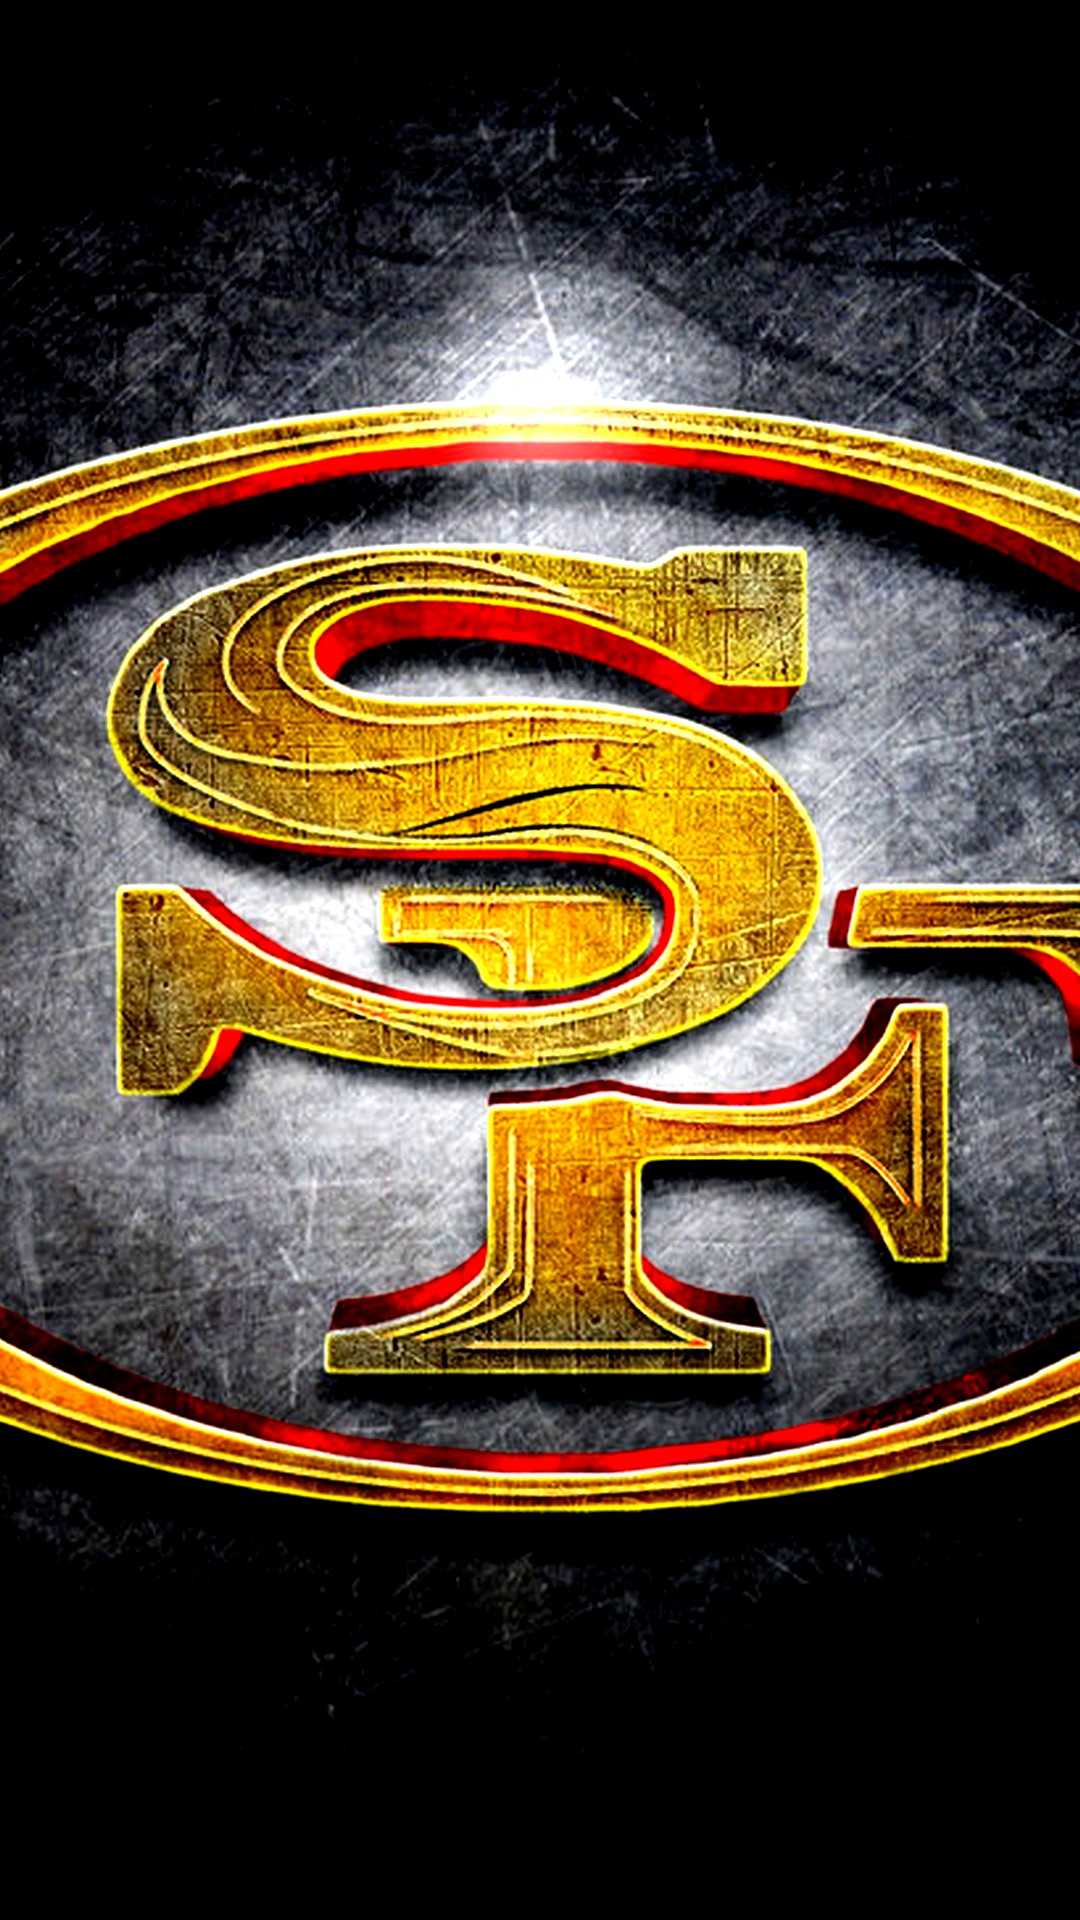 Background 49Ers Wallpaper